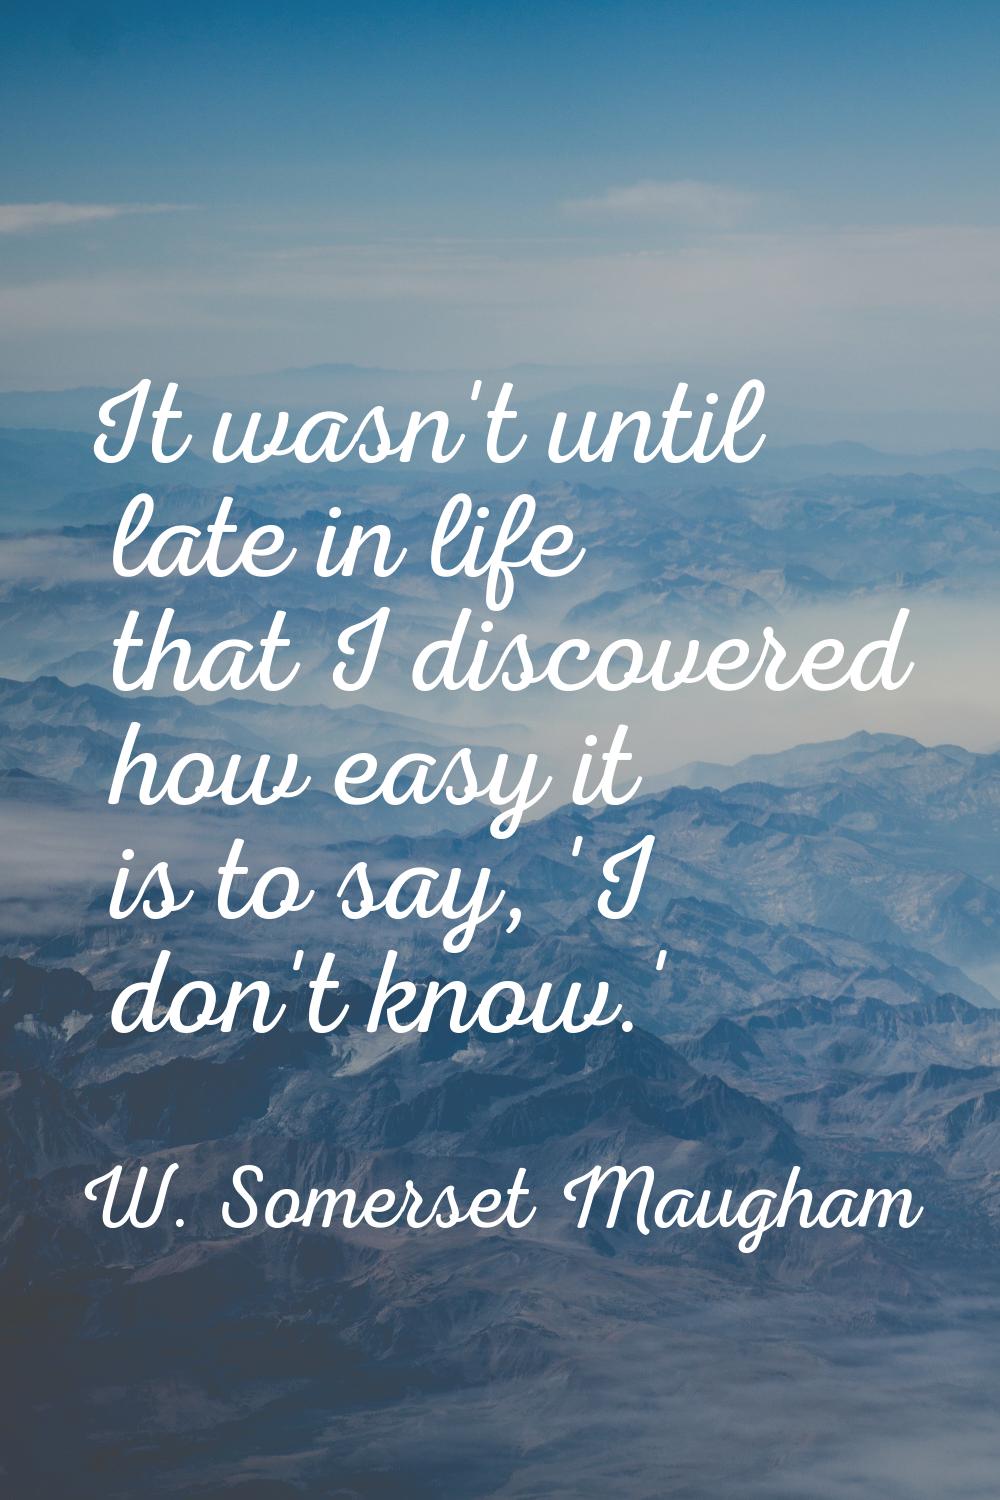 It wasn't until late in life that I discovered how easy it is to say, 'I don't know.'